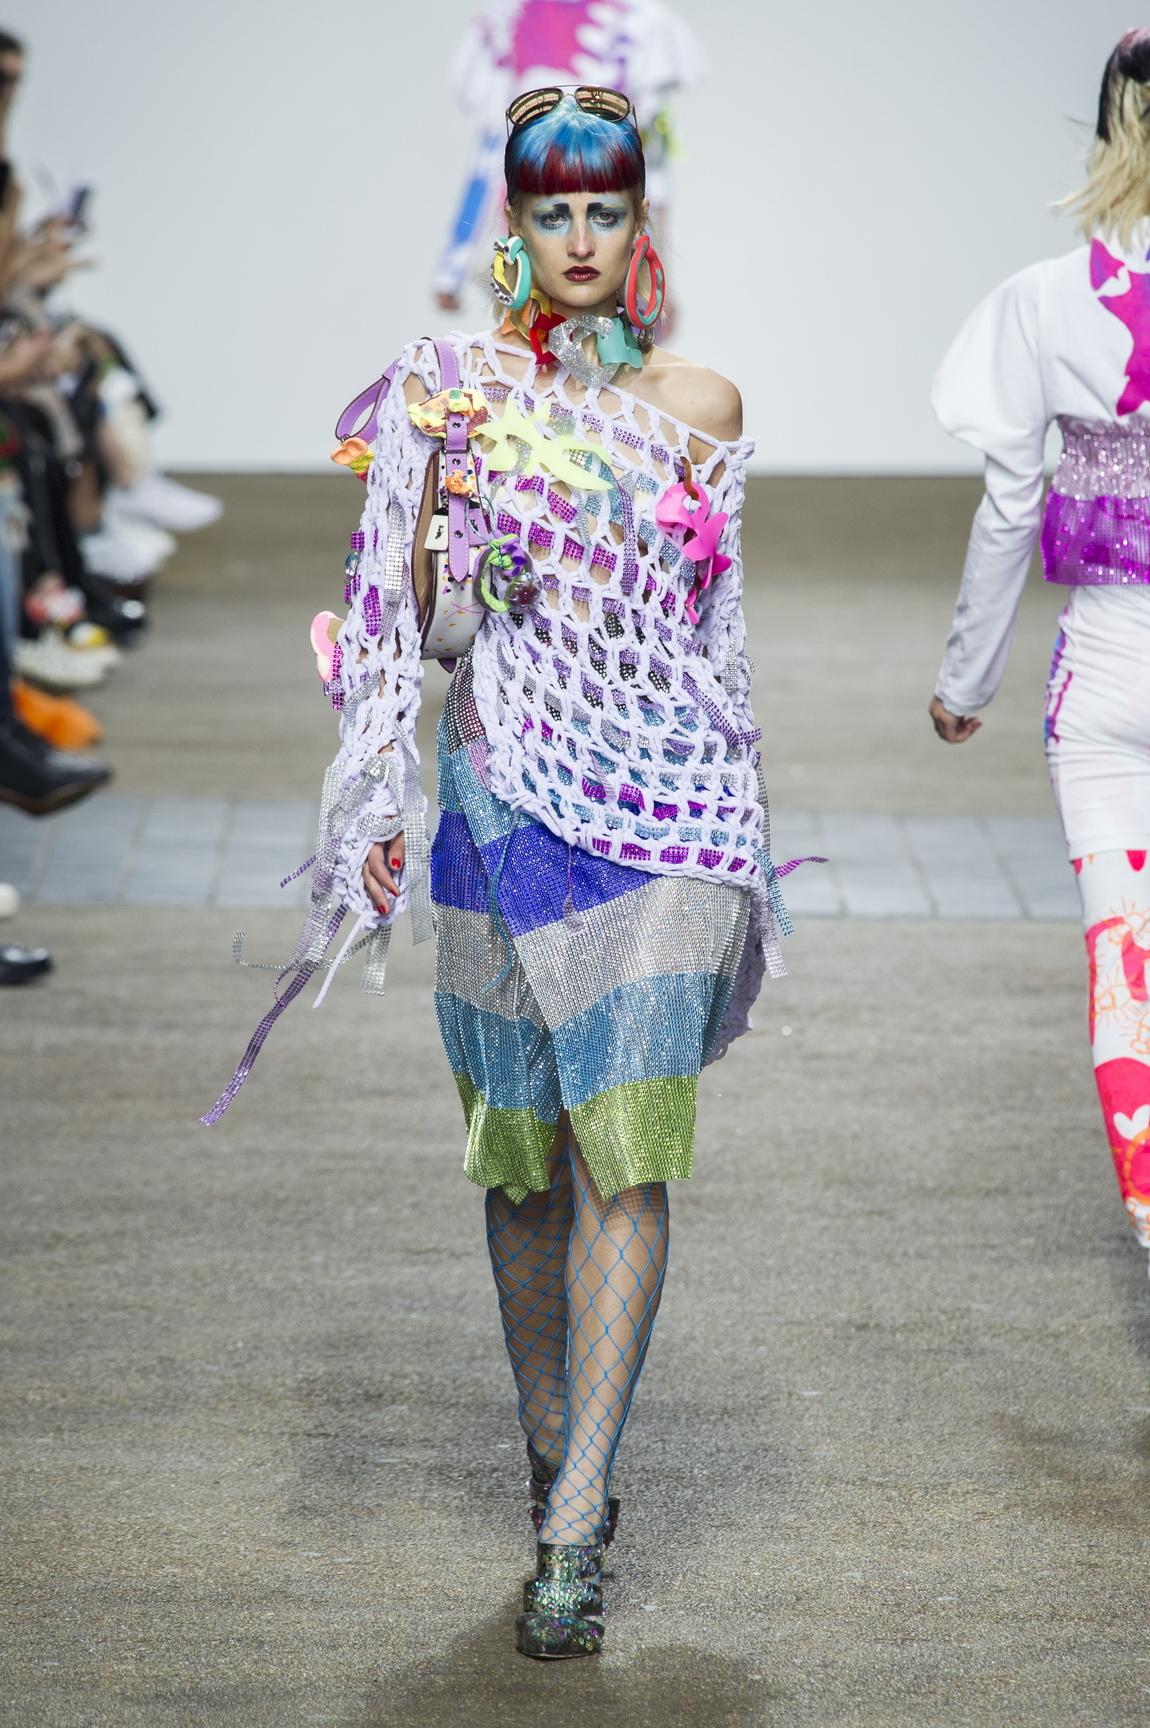 fashion east: mythical club creatures, a toxic paradise and sculptural ...